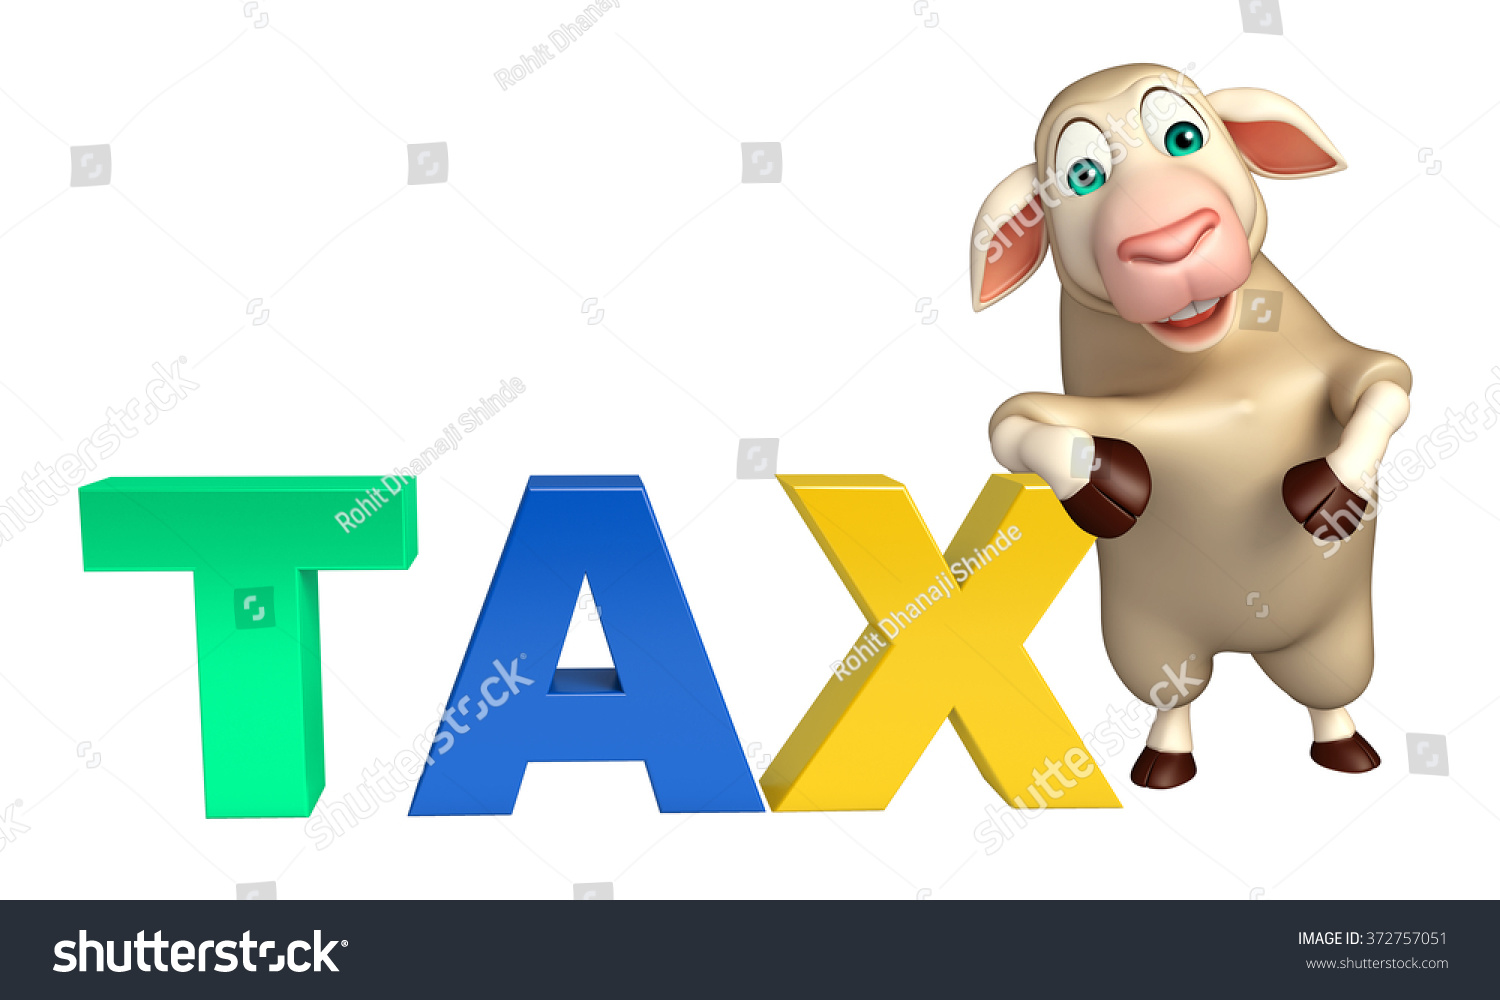 stock-photo--d-rendered-illustration-of-sheep-cartoon-character-with-tax-sign-372757051.jpg